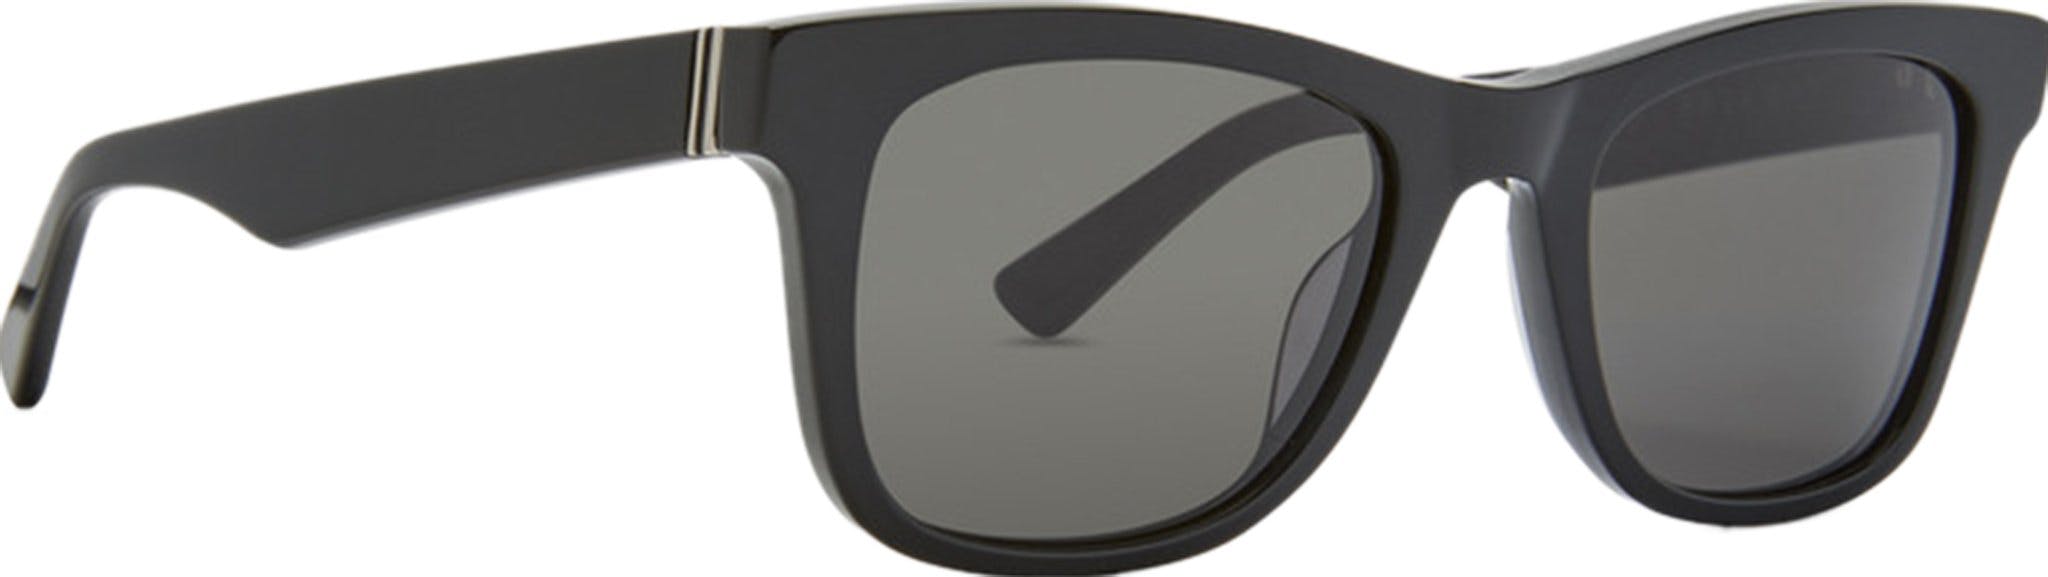 Product image for Faraway Sunglasses - Unisex